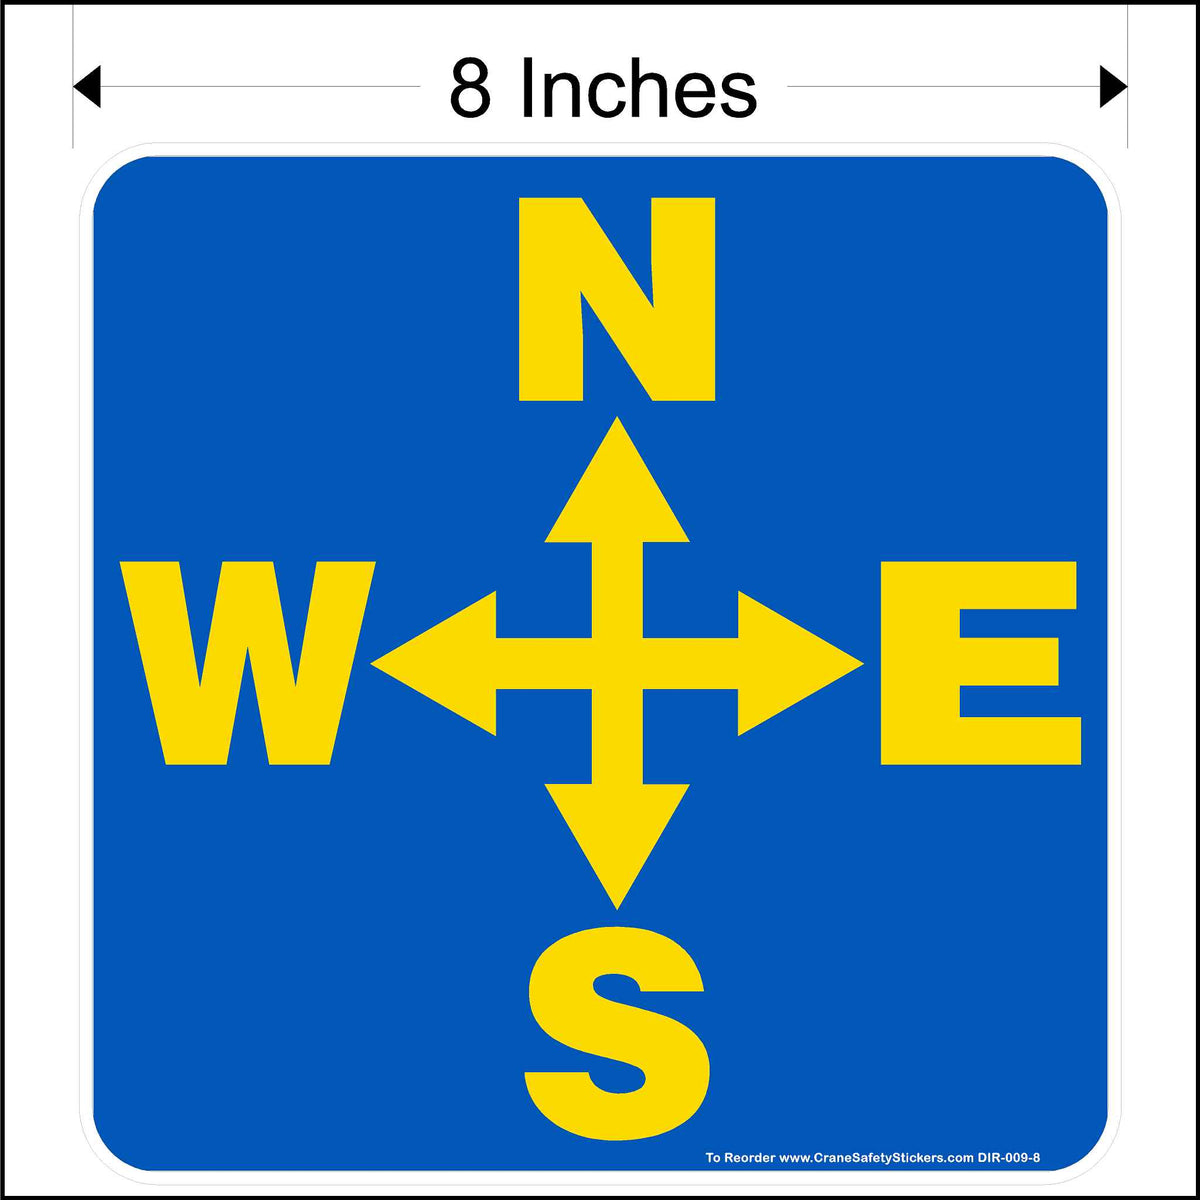 8 inch overhead crane directional decal printed with yellow north, south, east, and west arrows on a blue background.